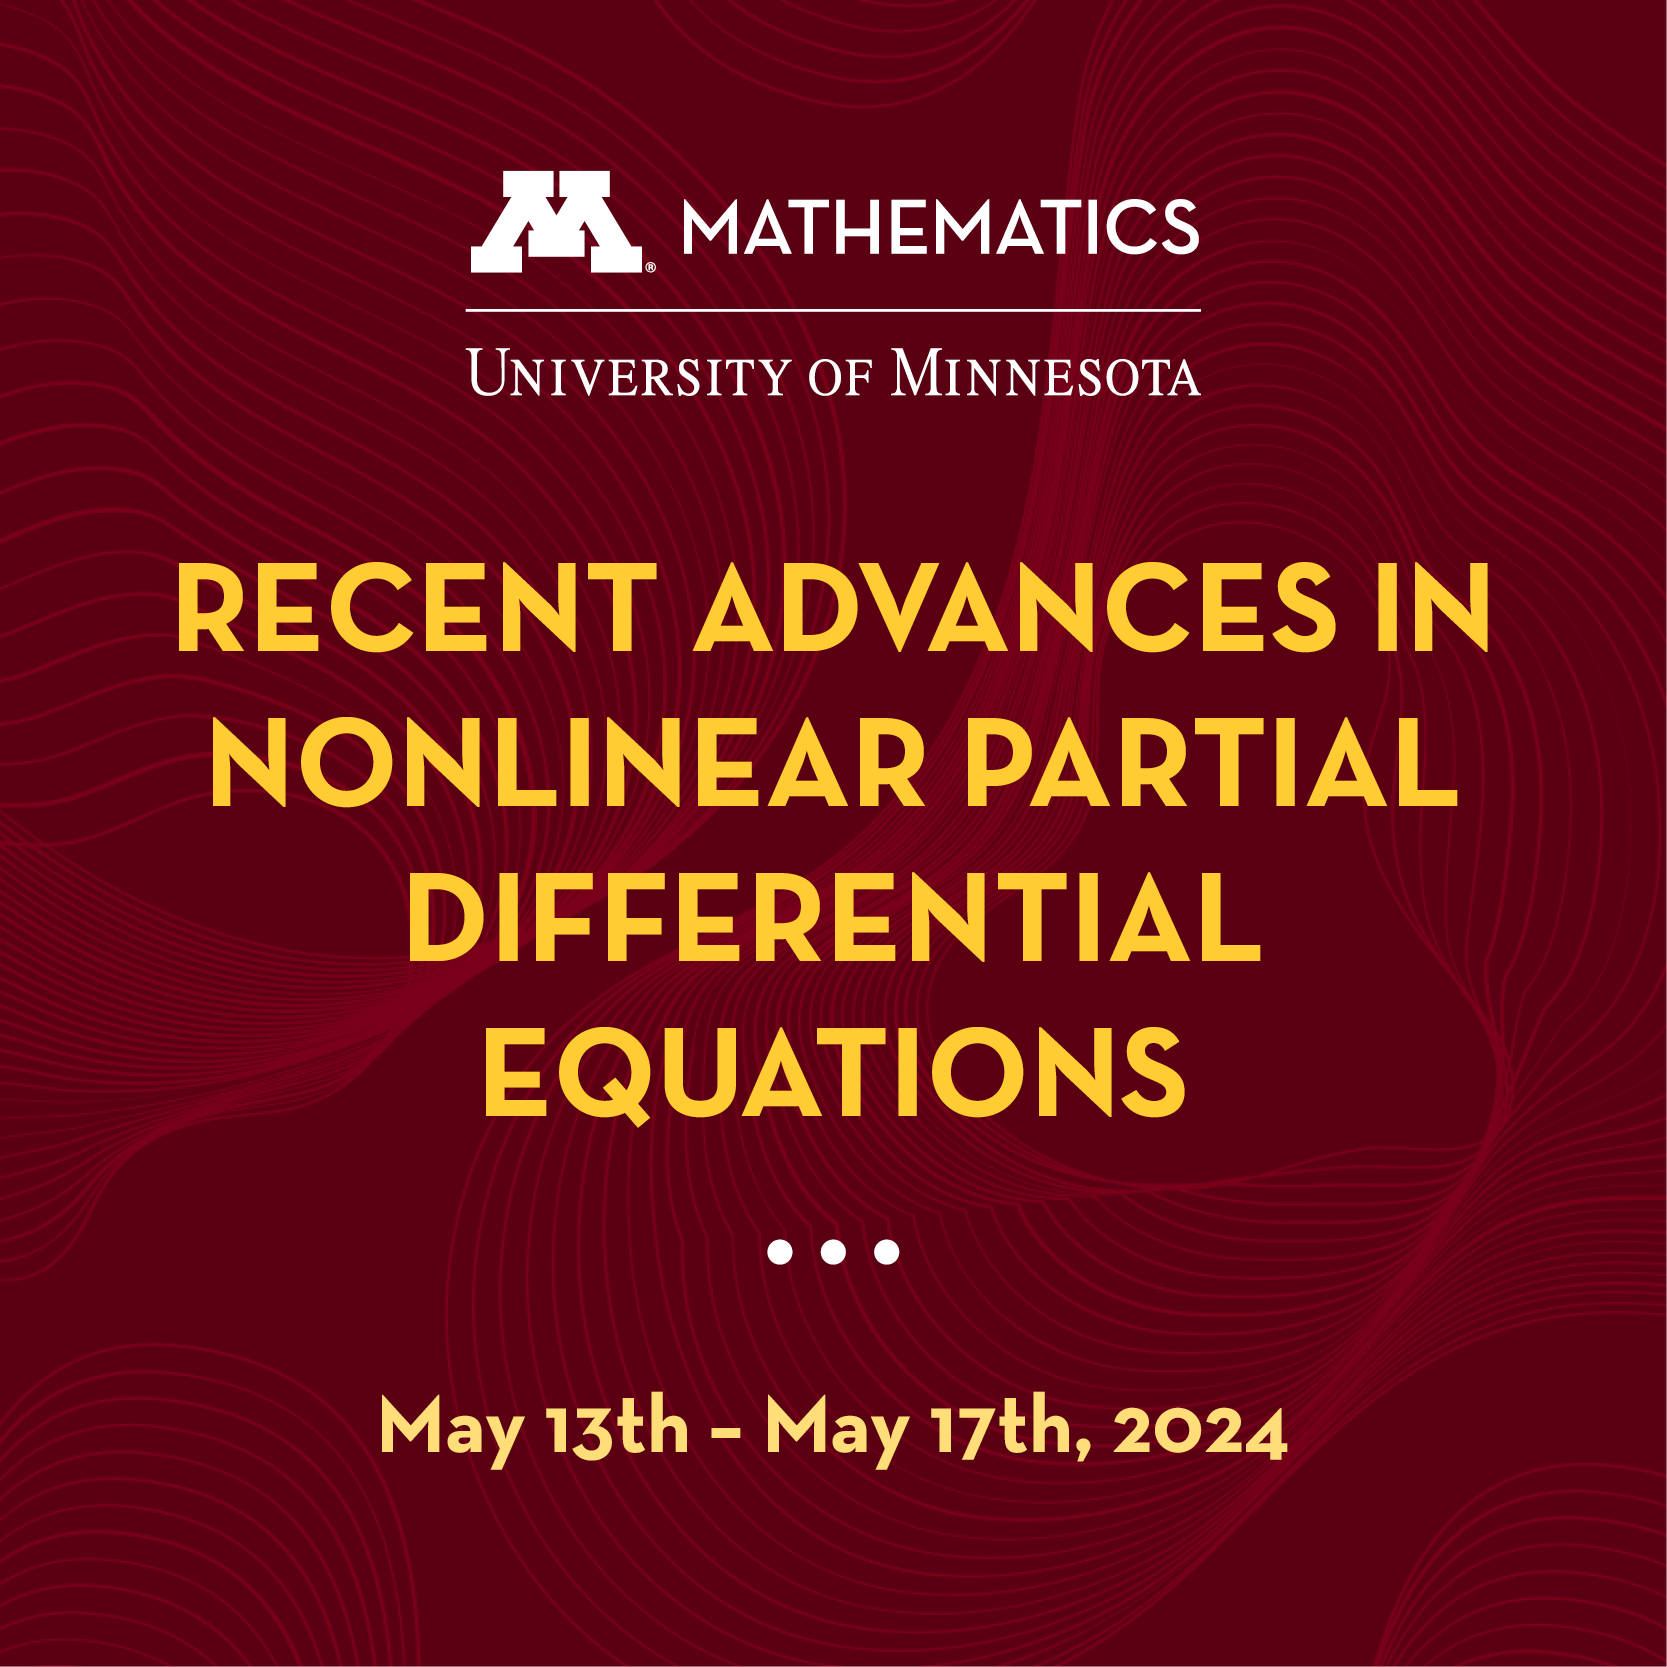 Maroon and gold Recent Advances in Nonlinear Partial Differential Equations graphic